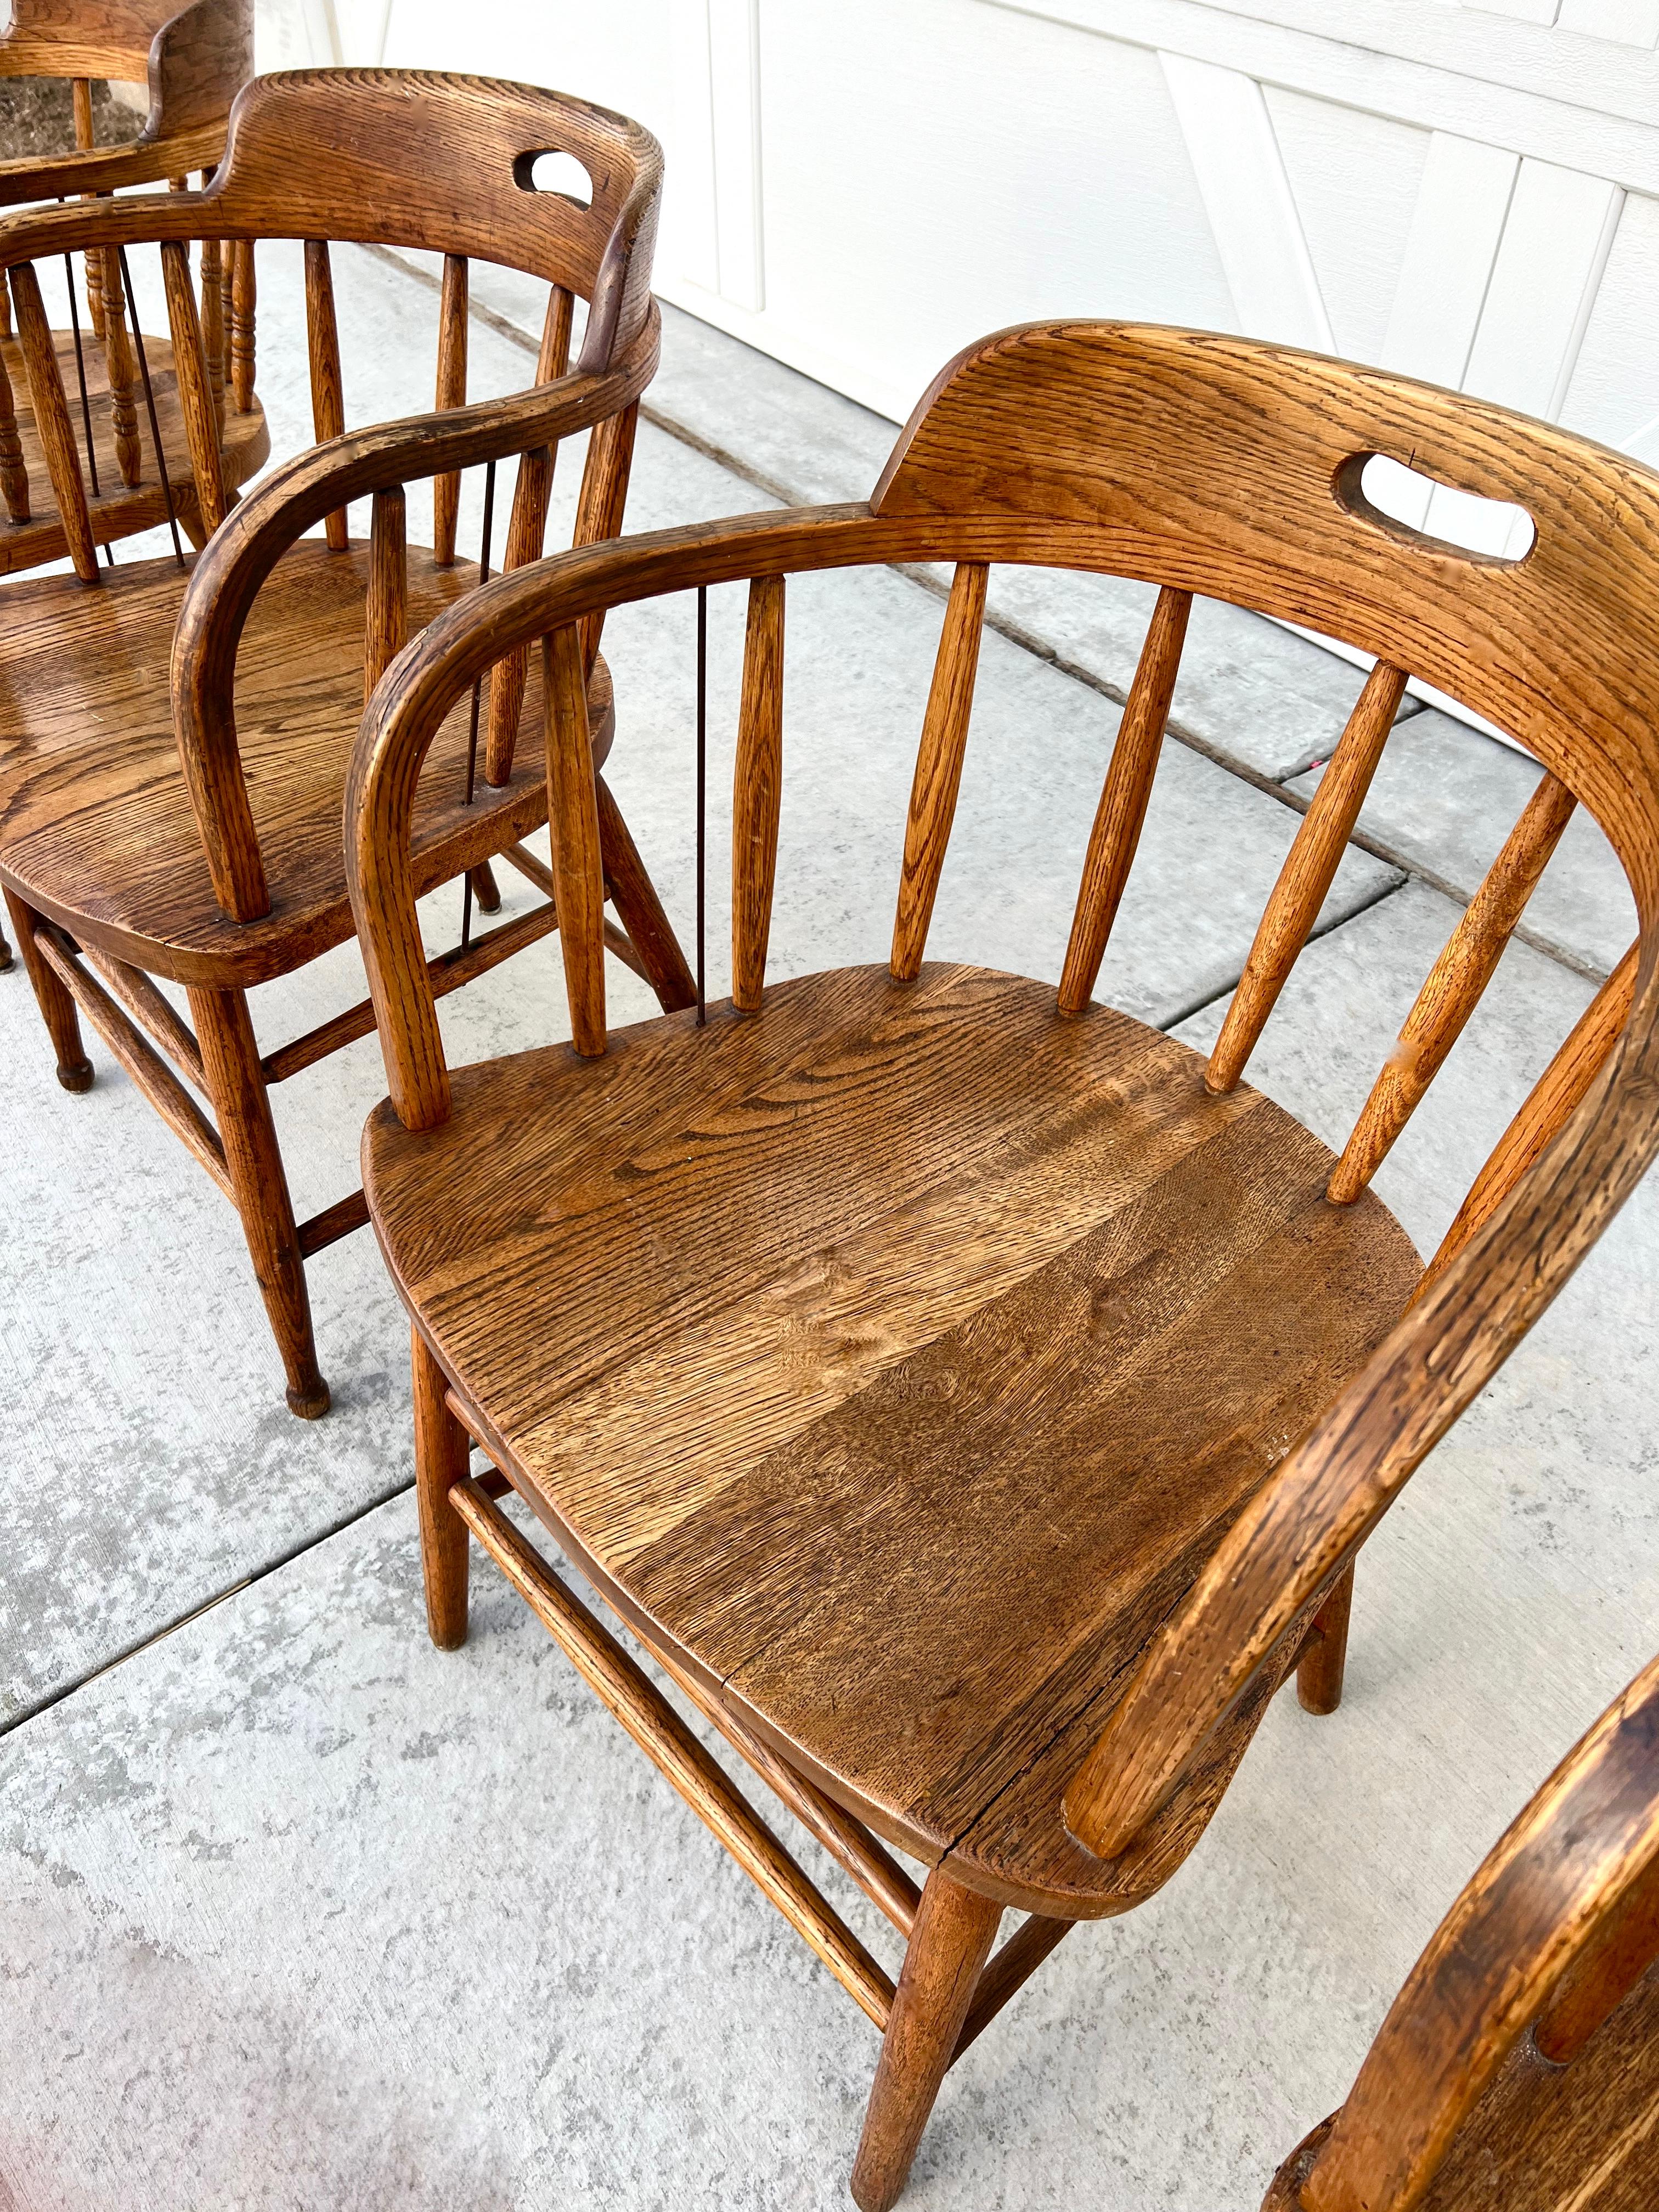 American Craftsman Early 20th Century Antique Mismatched Barrel Back Oak Wood Pub Captain's Chairs